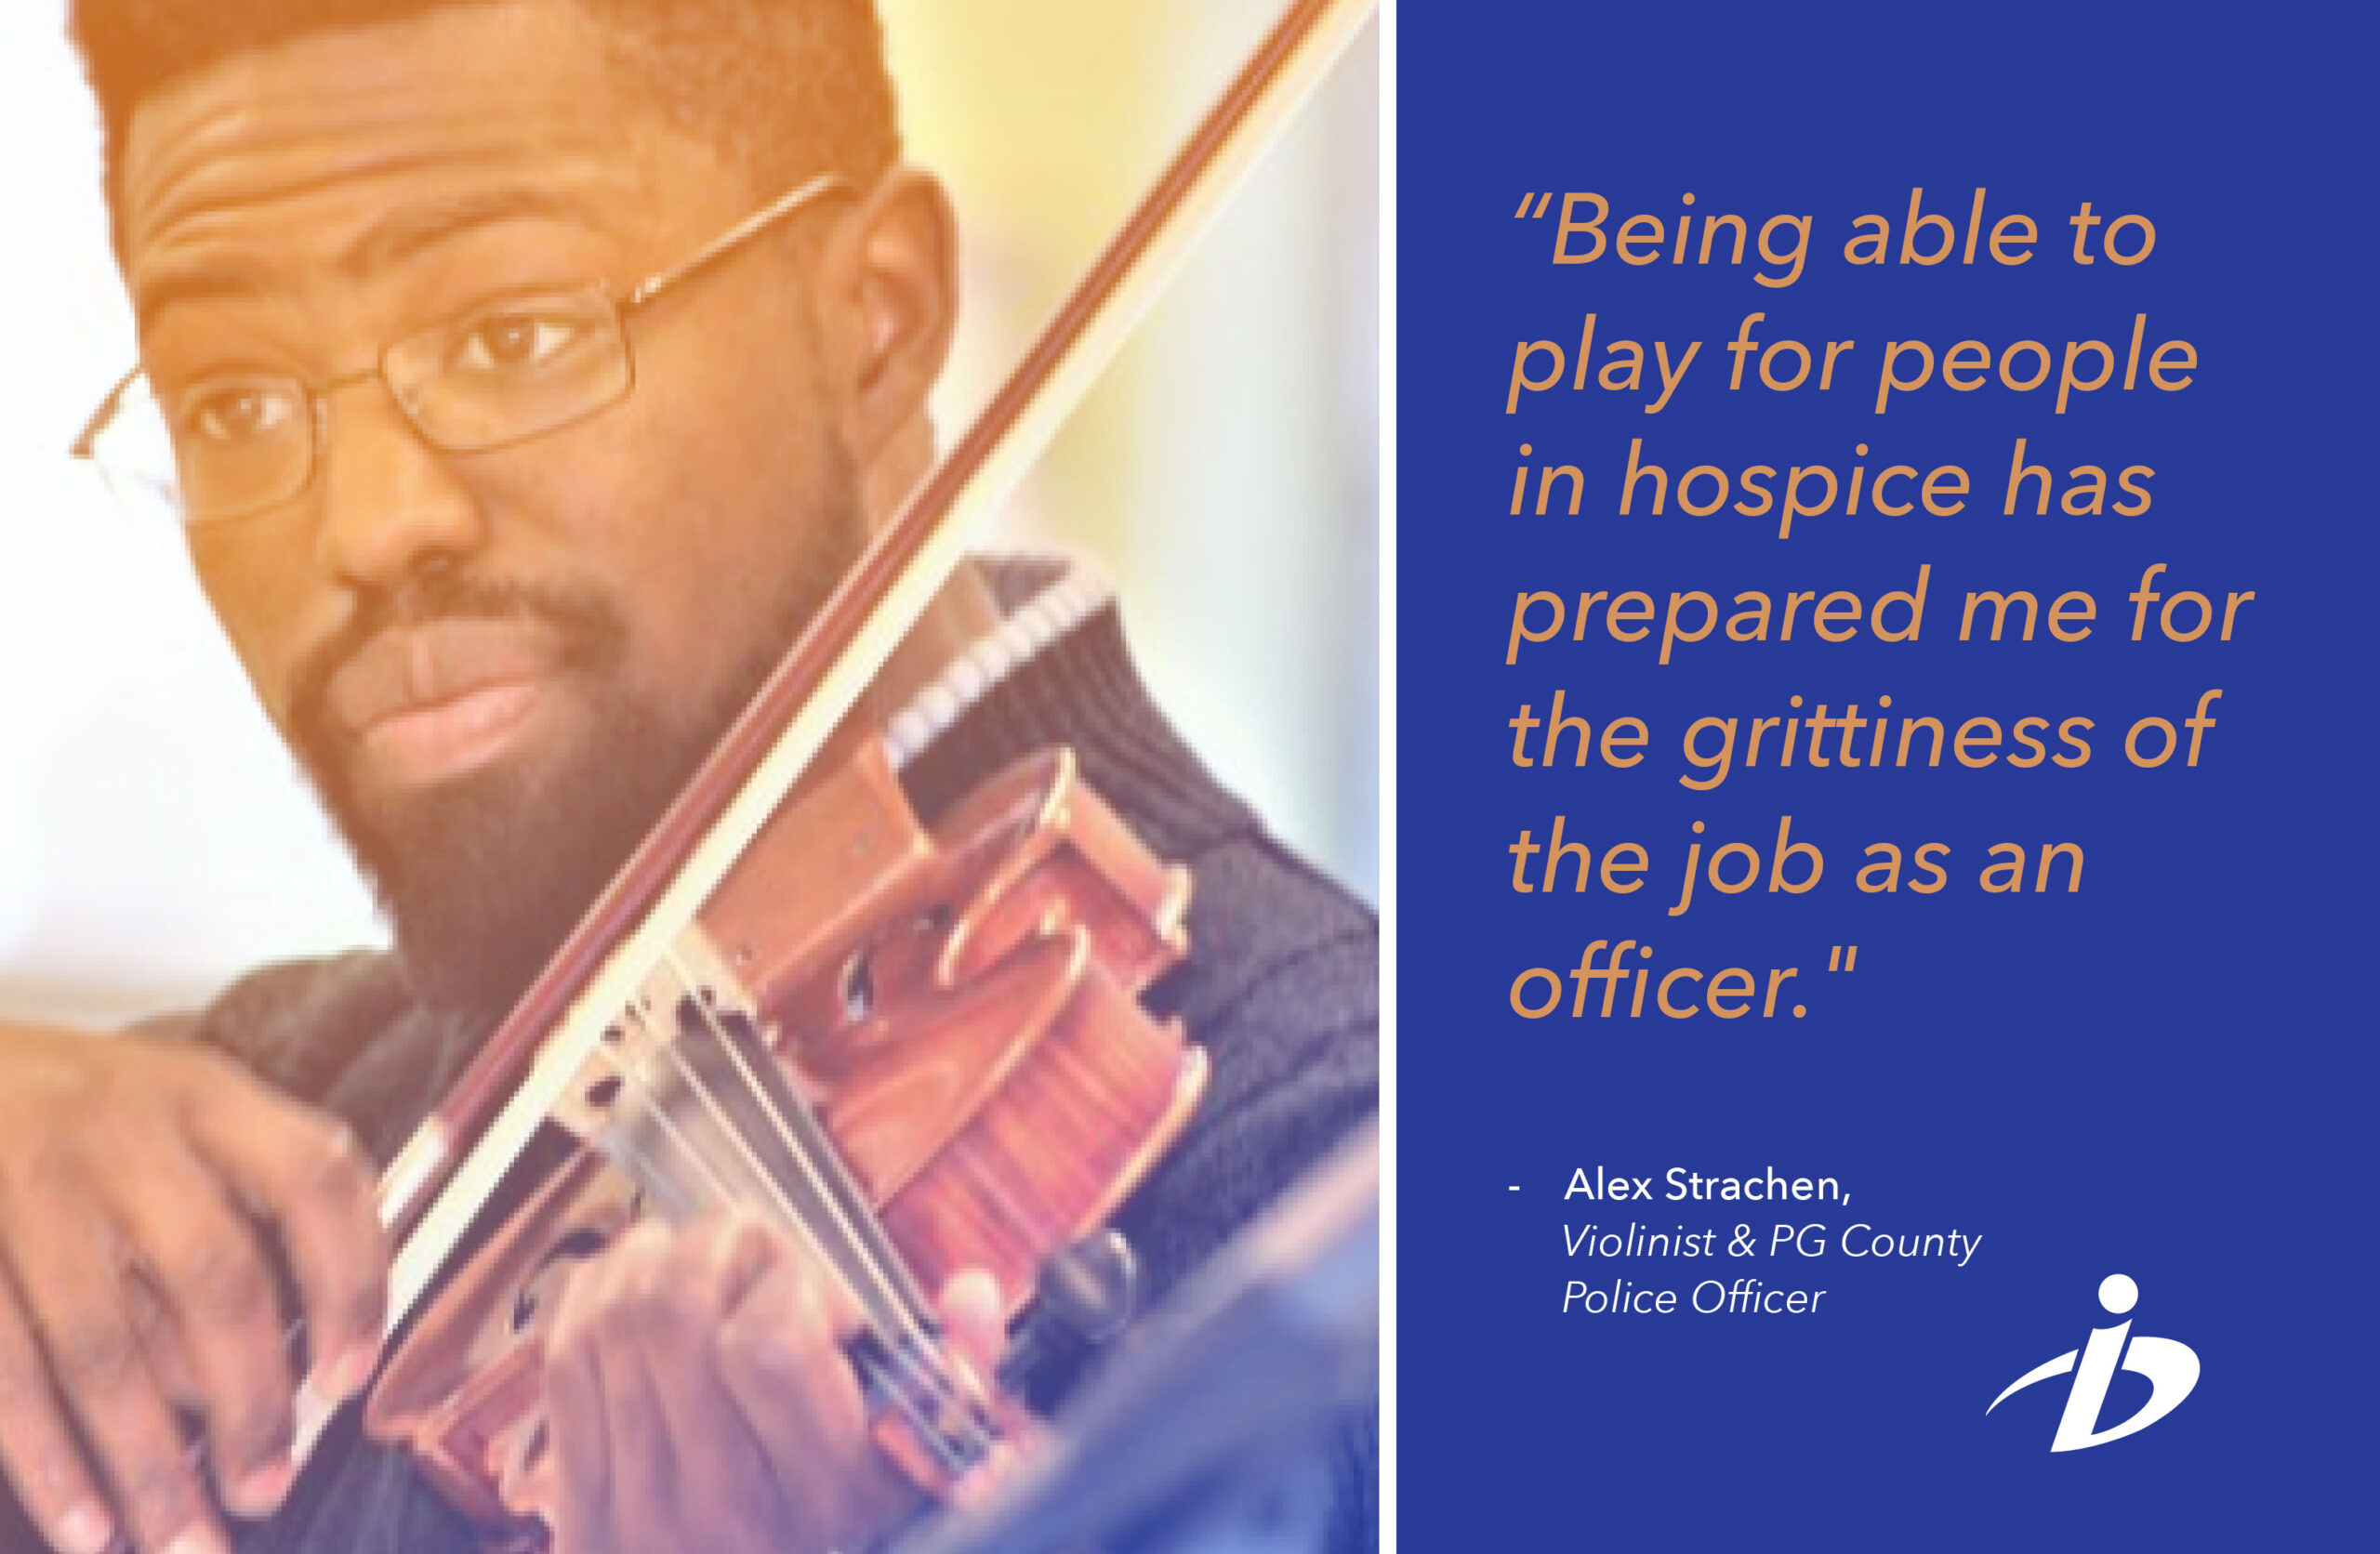 image of Alex Strachan (officer & savant) playing violin; quote from him: "Being able to play for people in hospice has prepared me for the grittiness of the job as an officer."